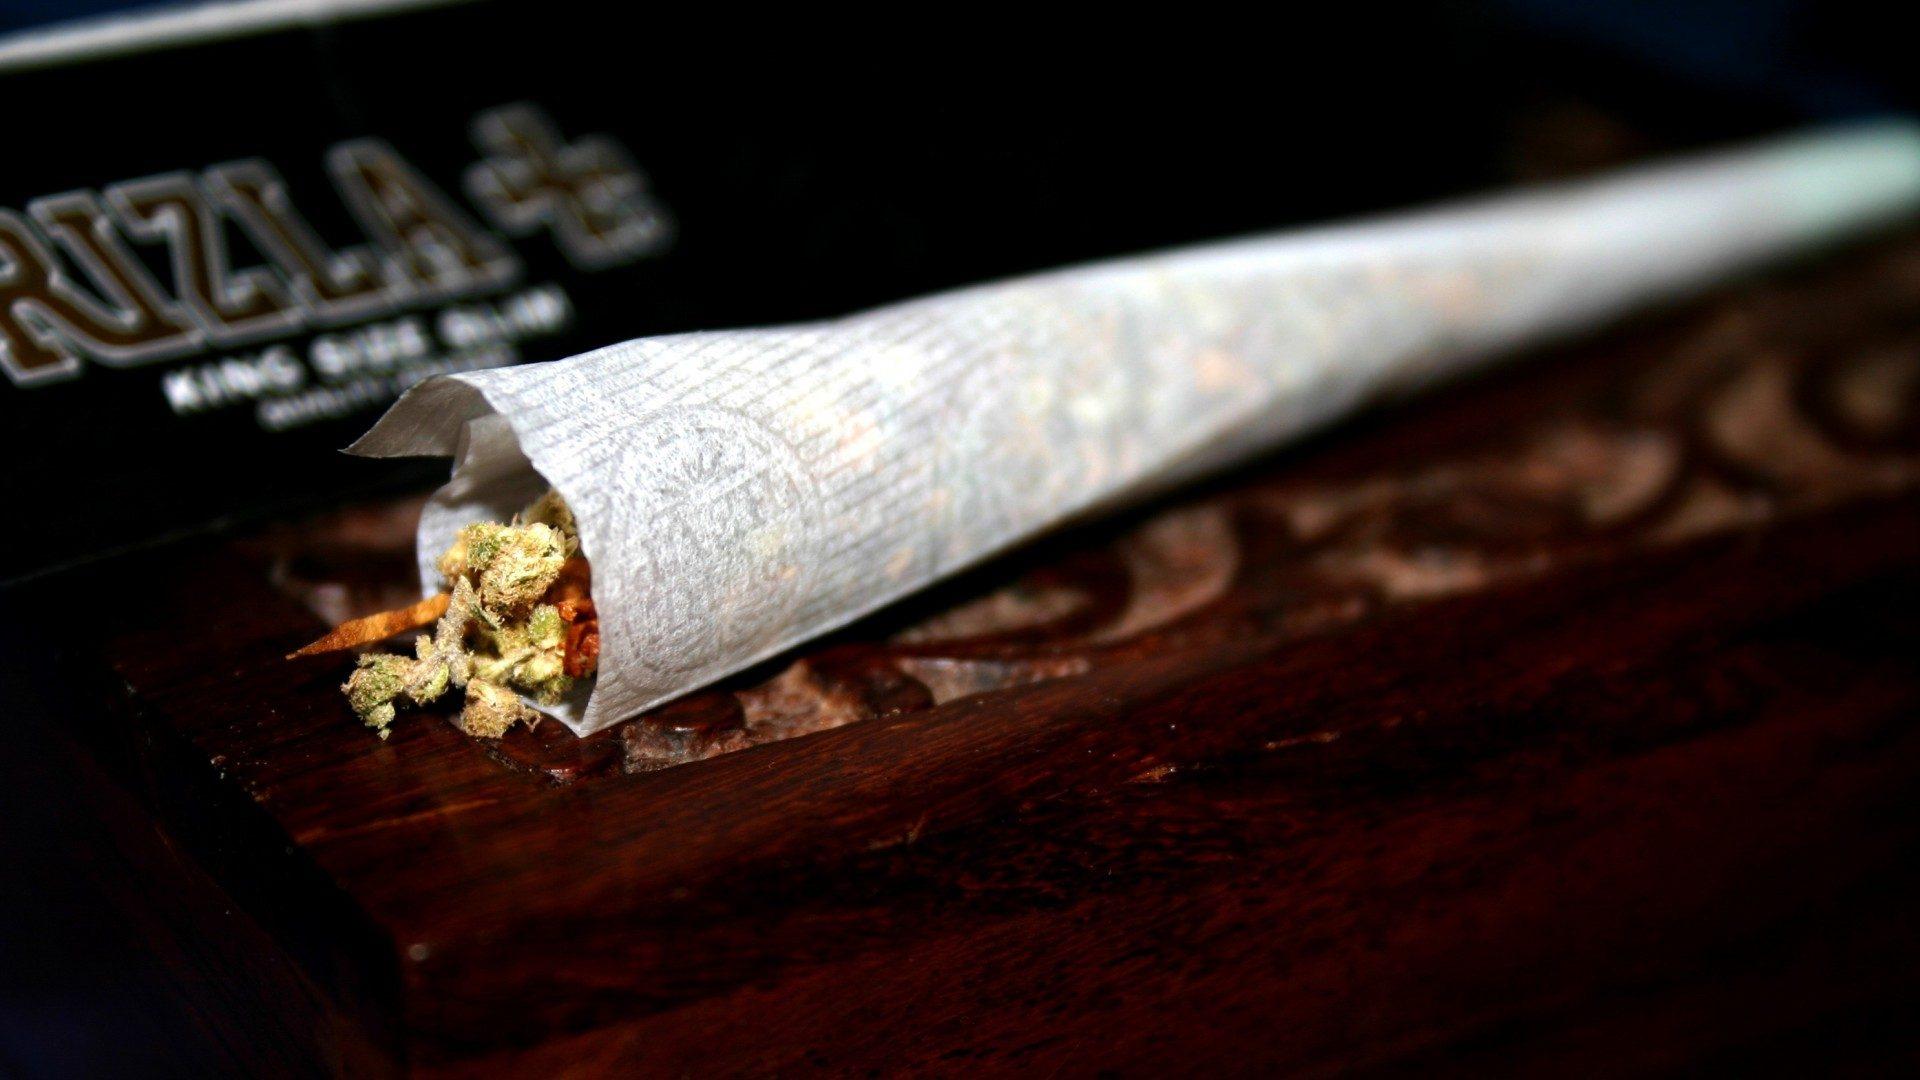 HD Wallpaper Of A Cannabis Joint